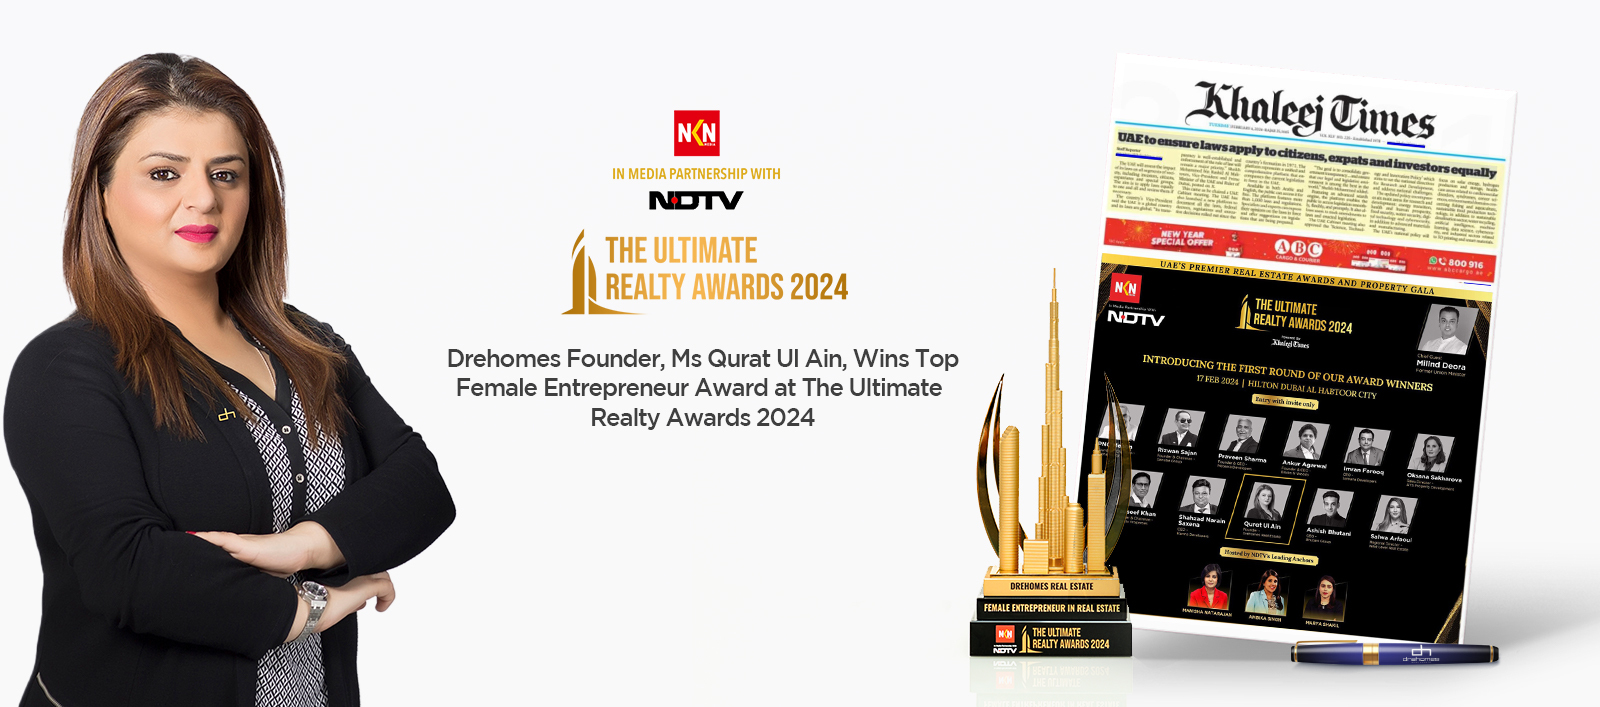 Drehomes Founder, Ms Qurat Ul Ain, is a First-Round Winner at The Ultimate Realty Awards 2024